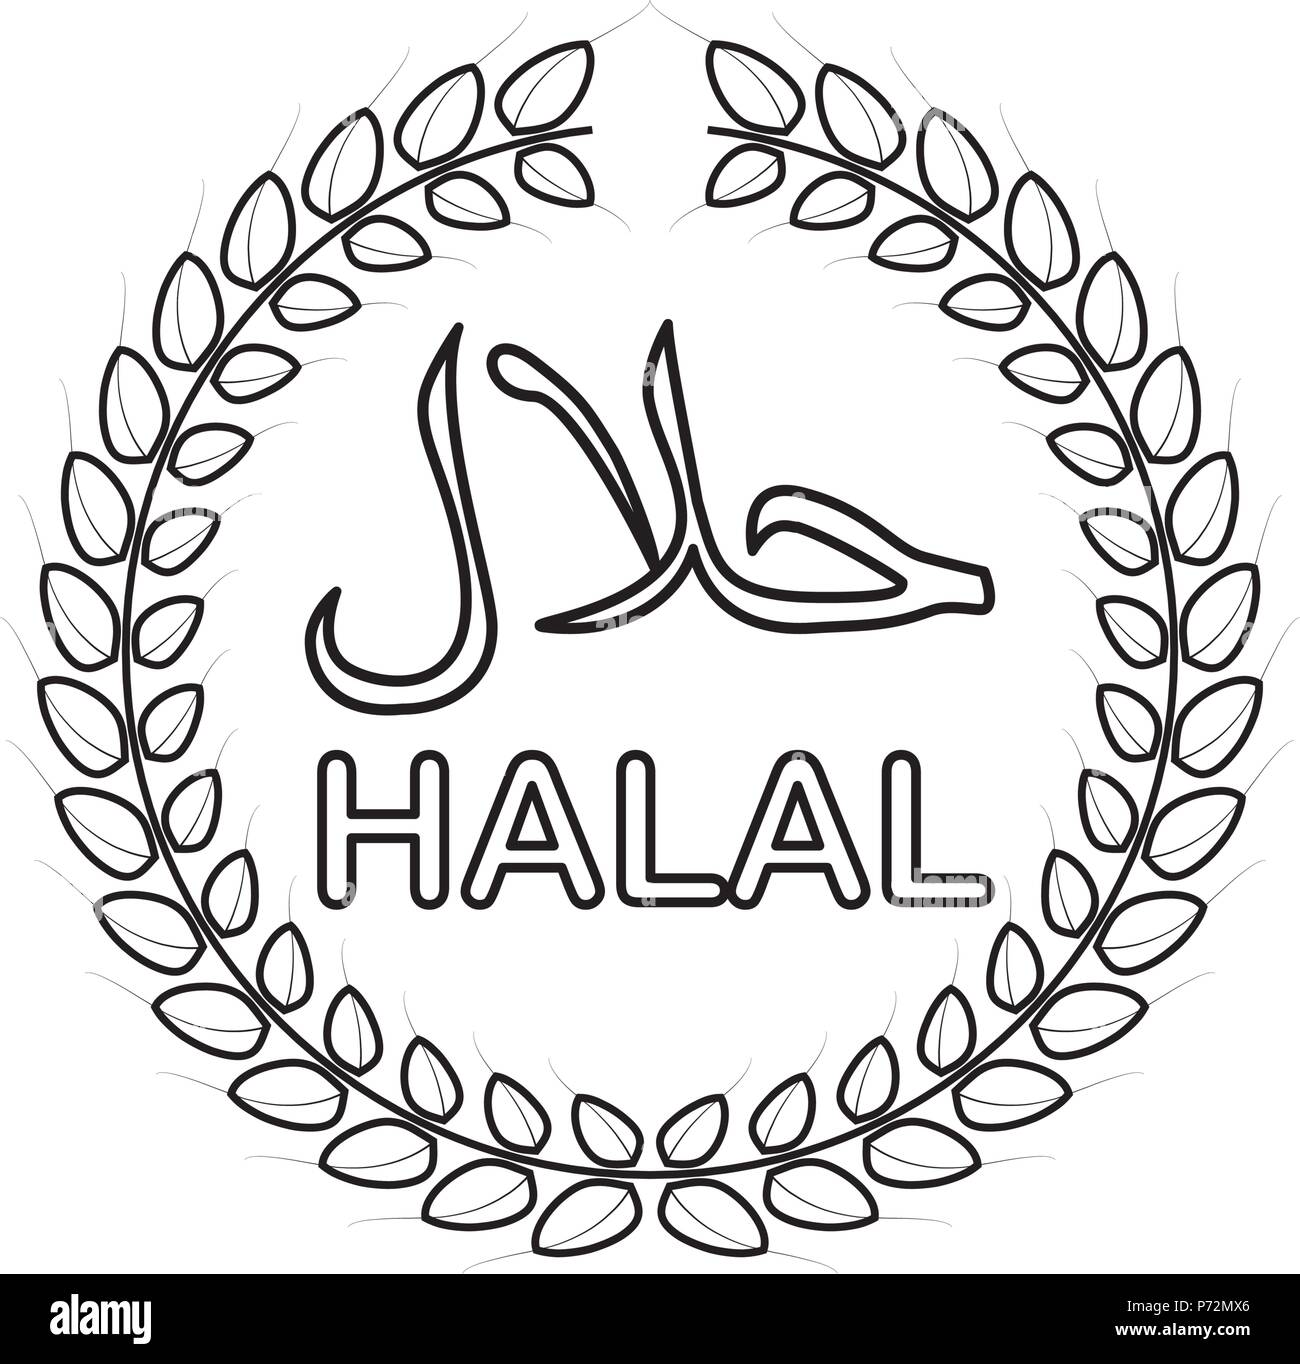 halal label icon vector template Stock Vector